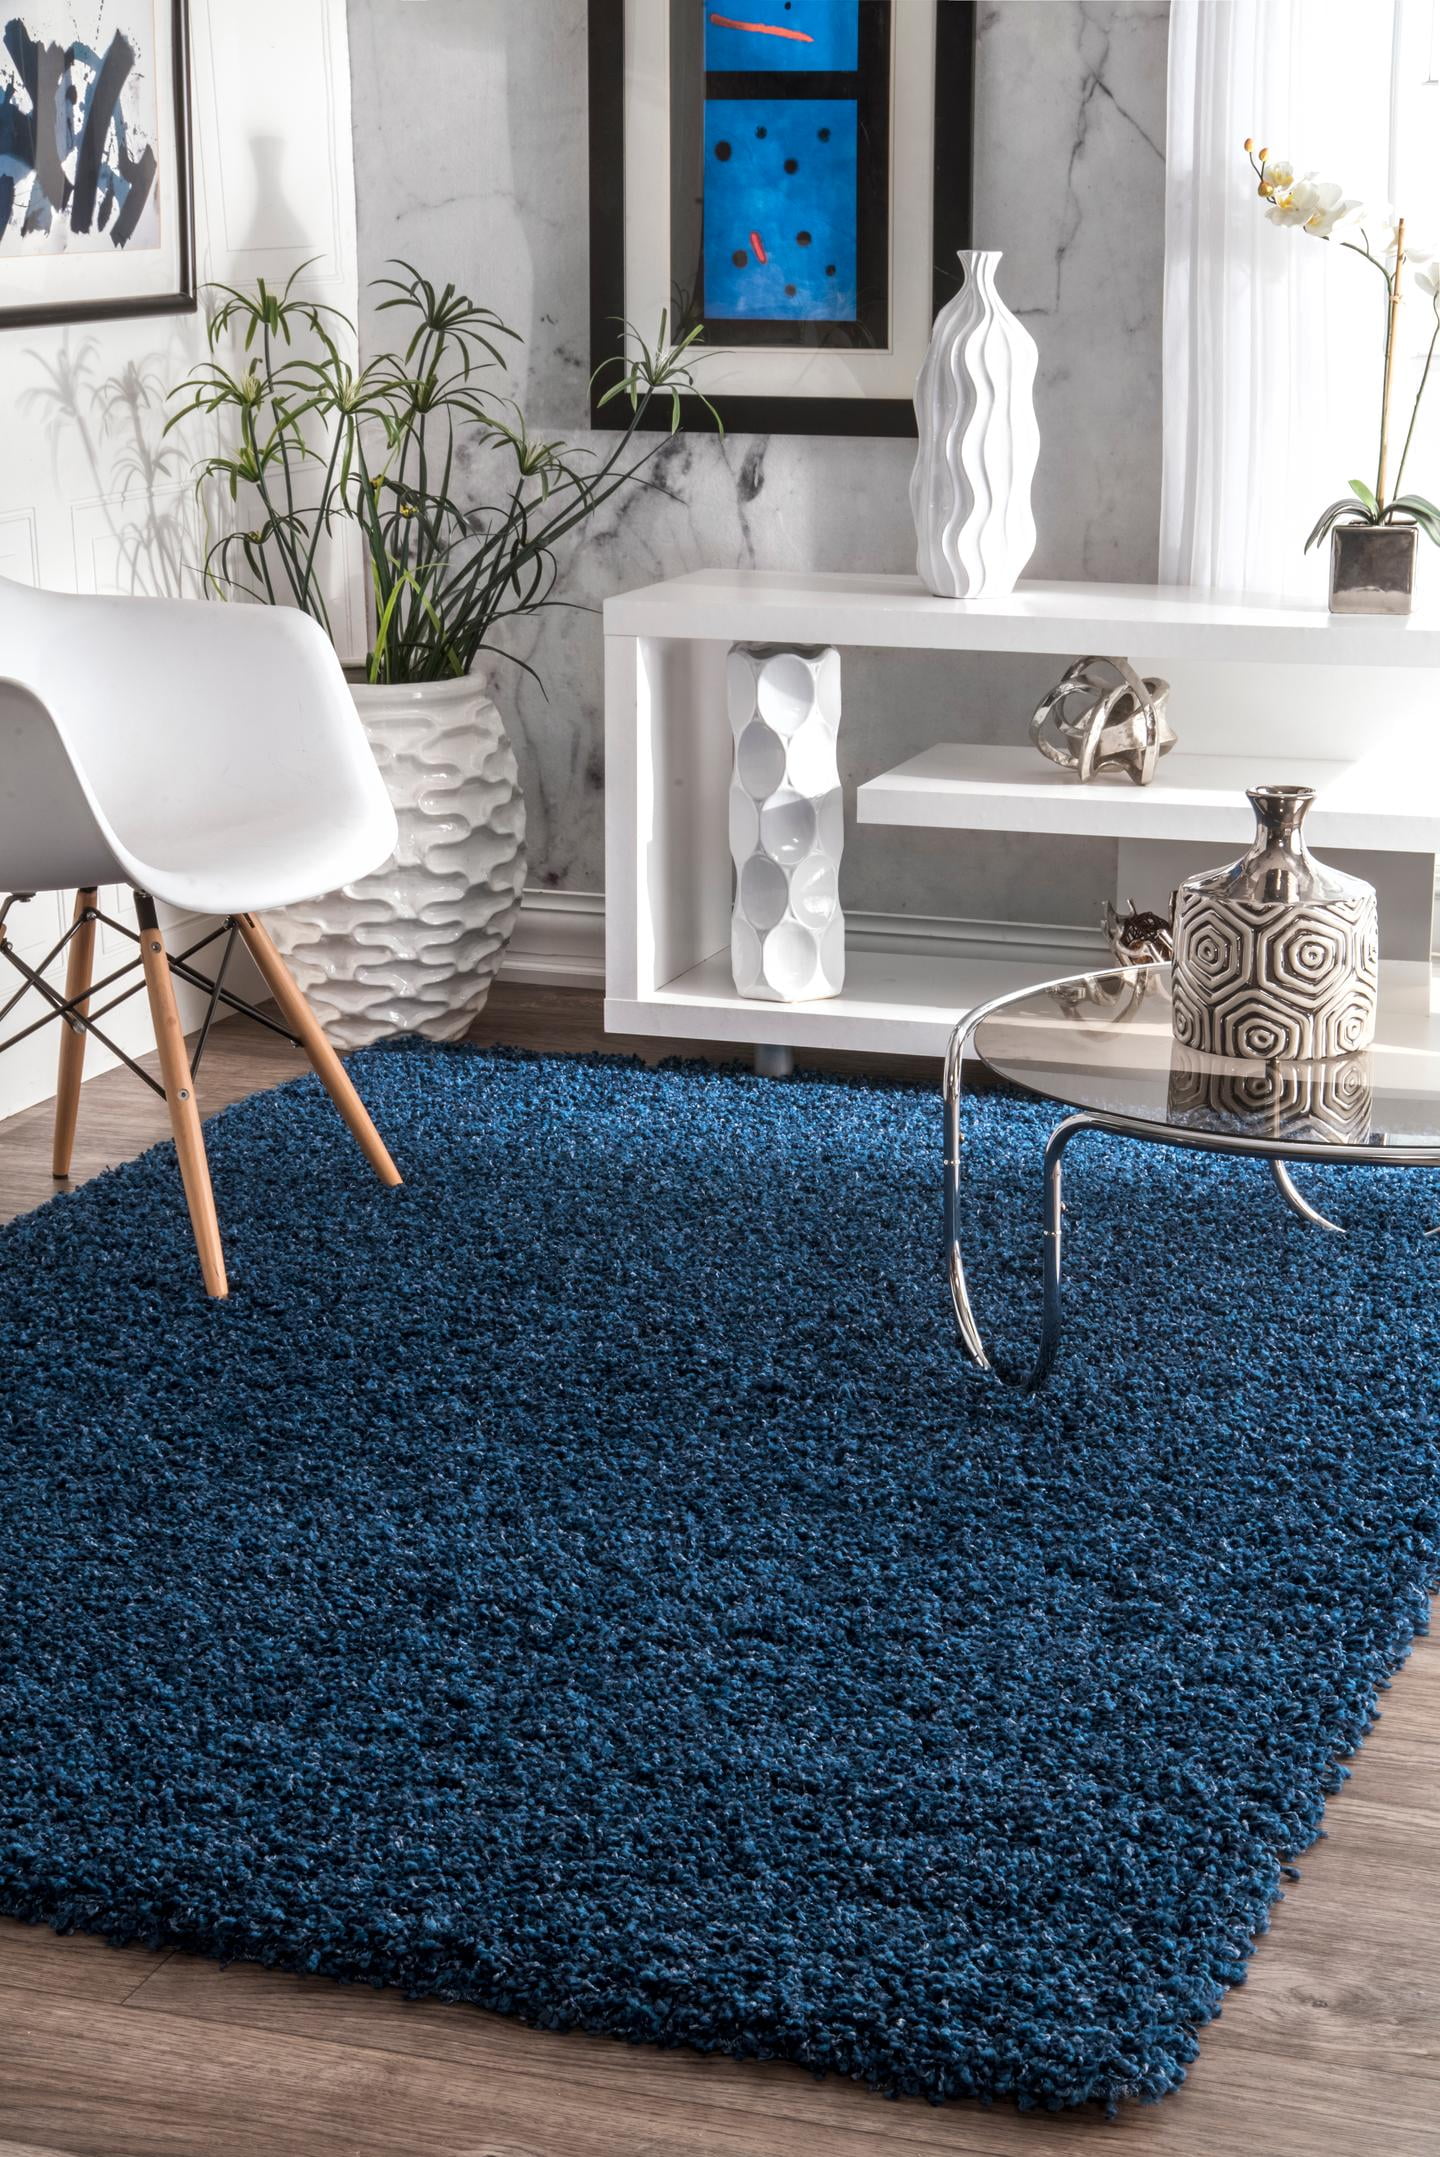 MODERN QUALITY THICK RUGS "PRIMO" Small Large size CHEAP HEAT-SET Best-Carpets 